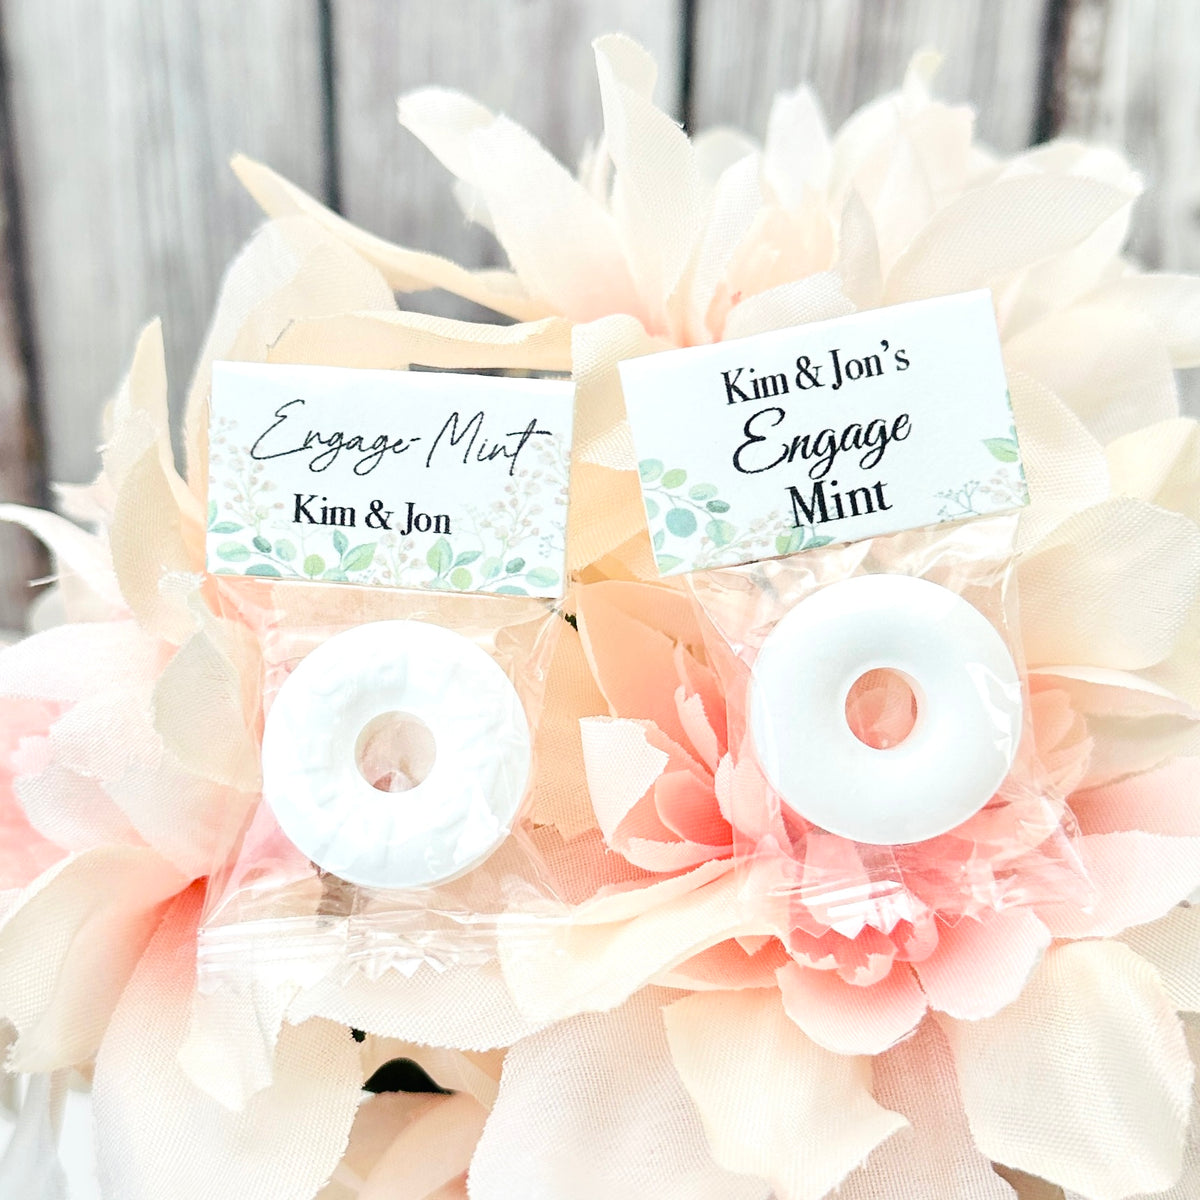 Our Engage-Mint Favors